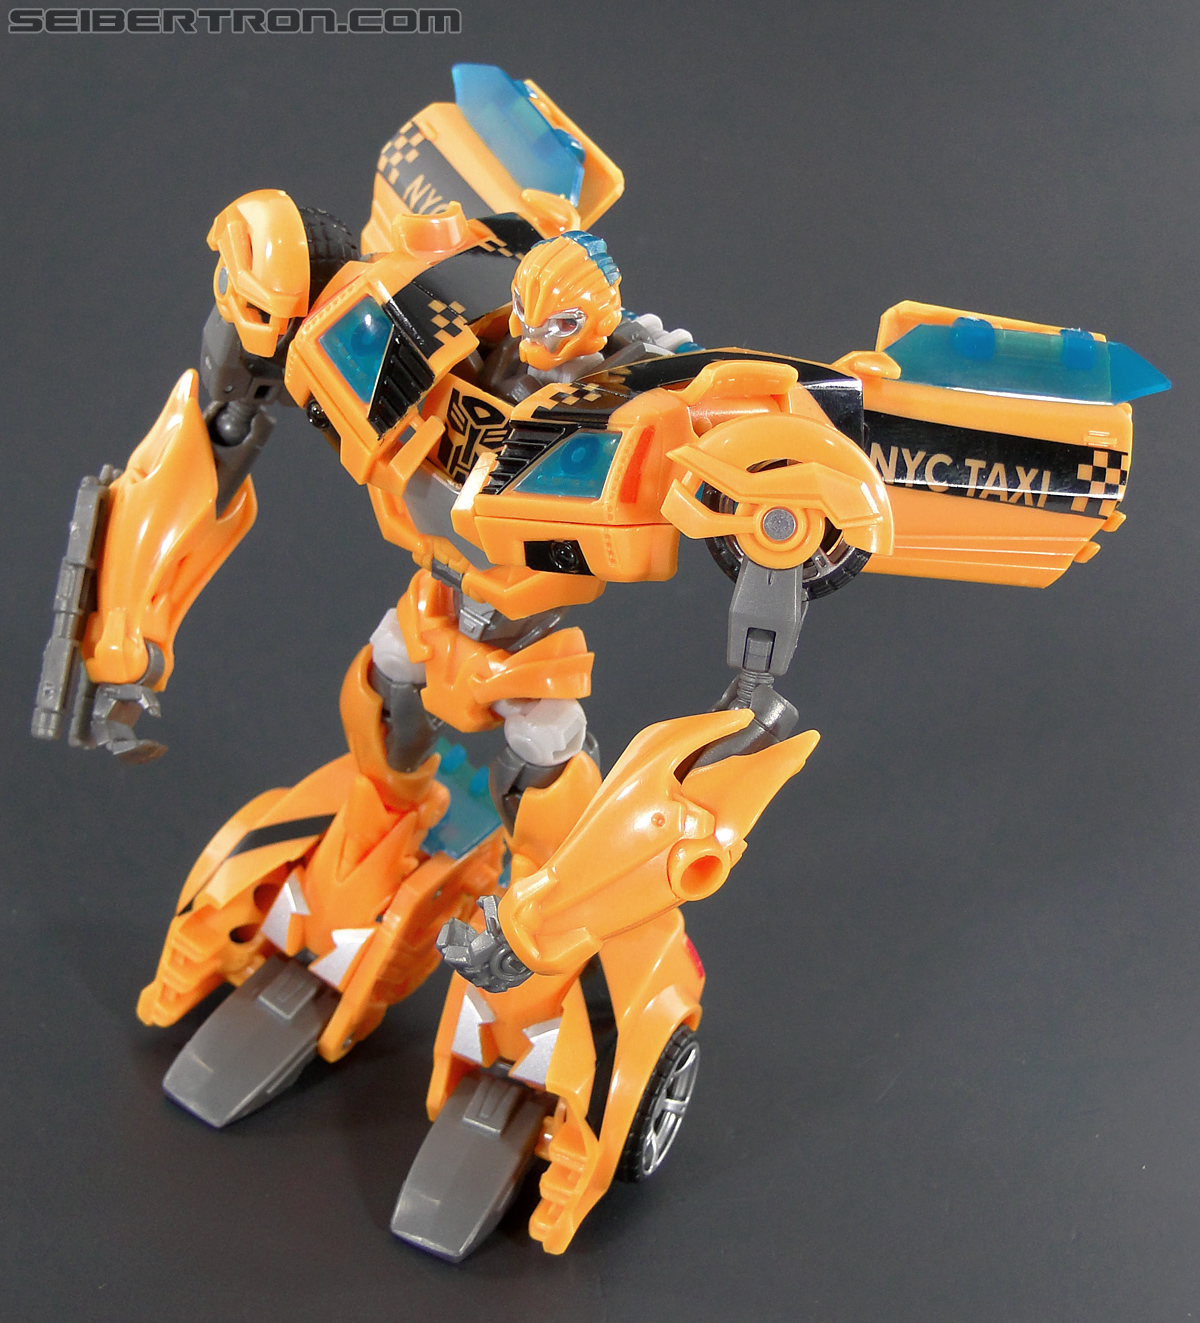 Transformers Prime: First Edition Bumblebee (NYCC) (Image #132 of 185)